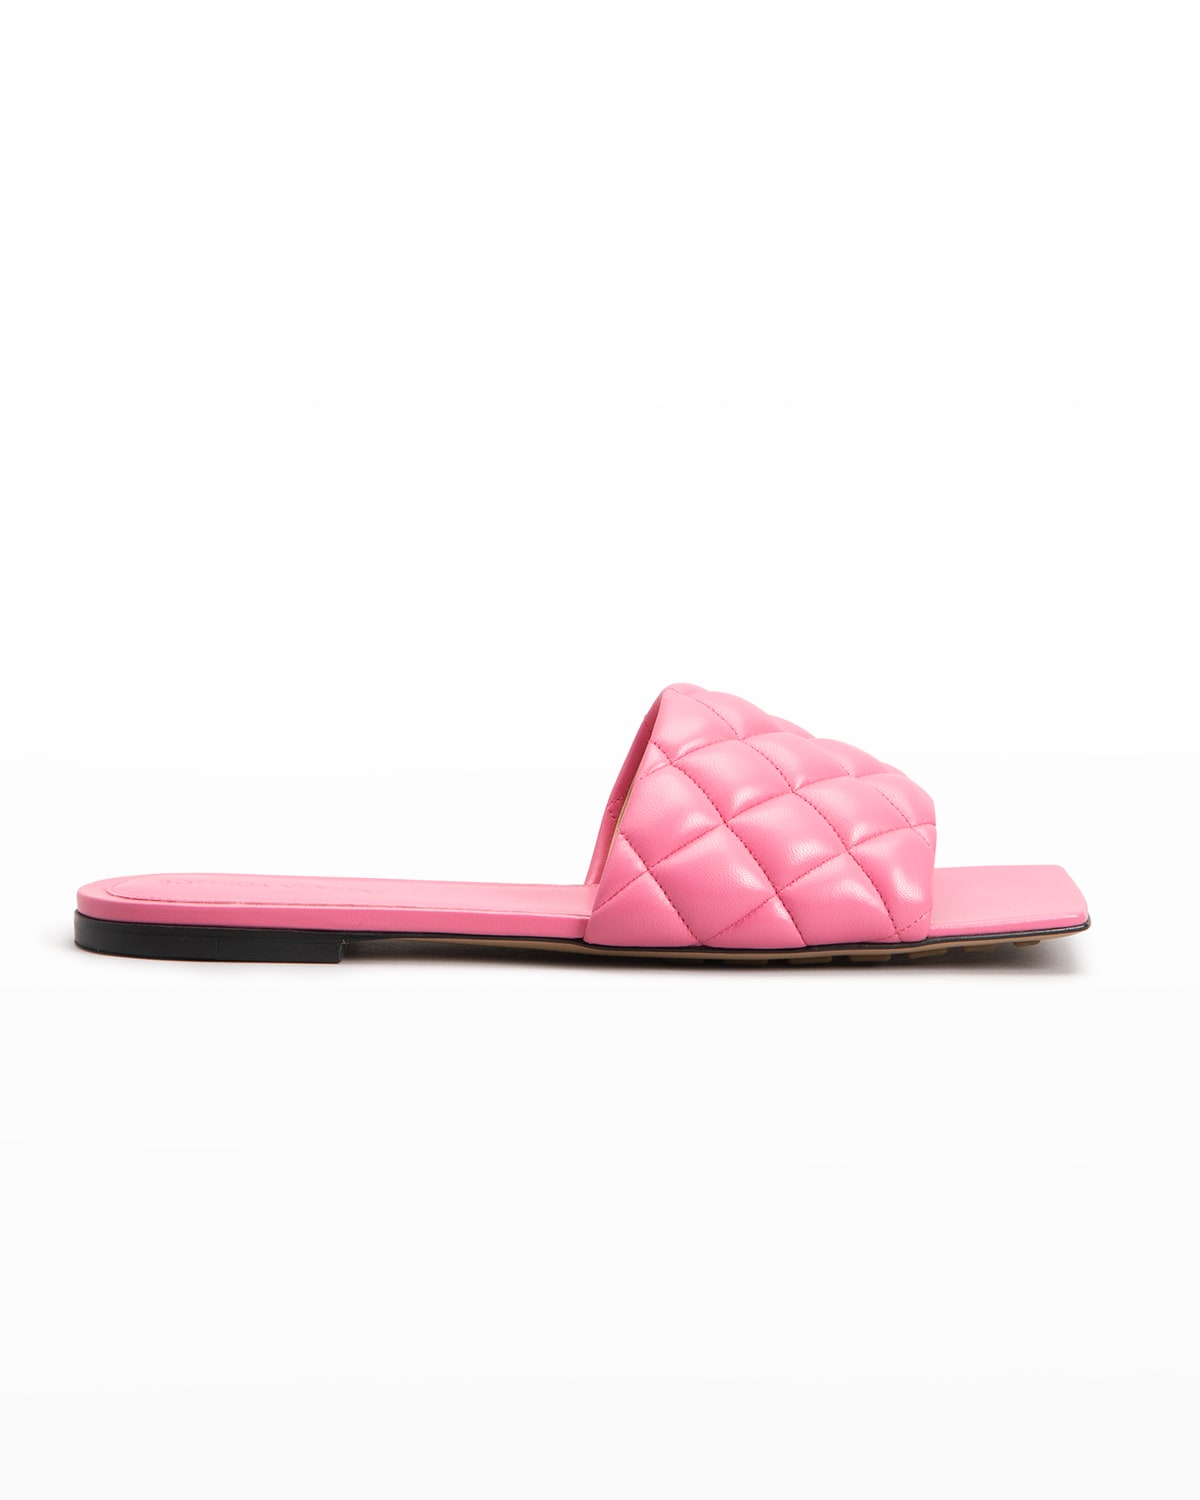 The Padded Flat Sandals